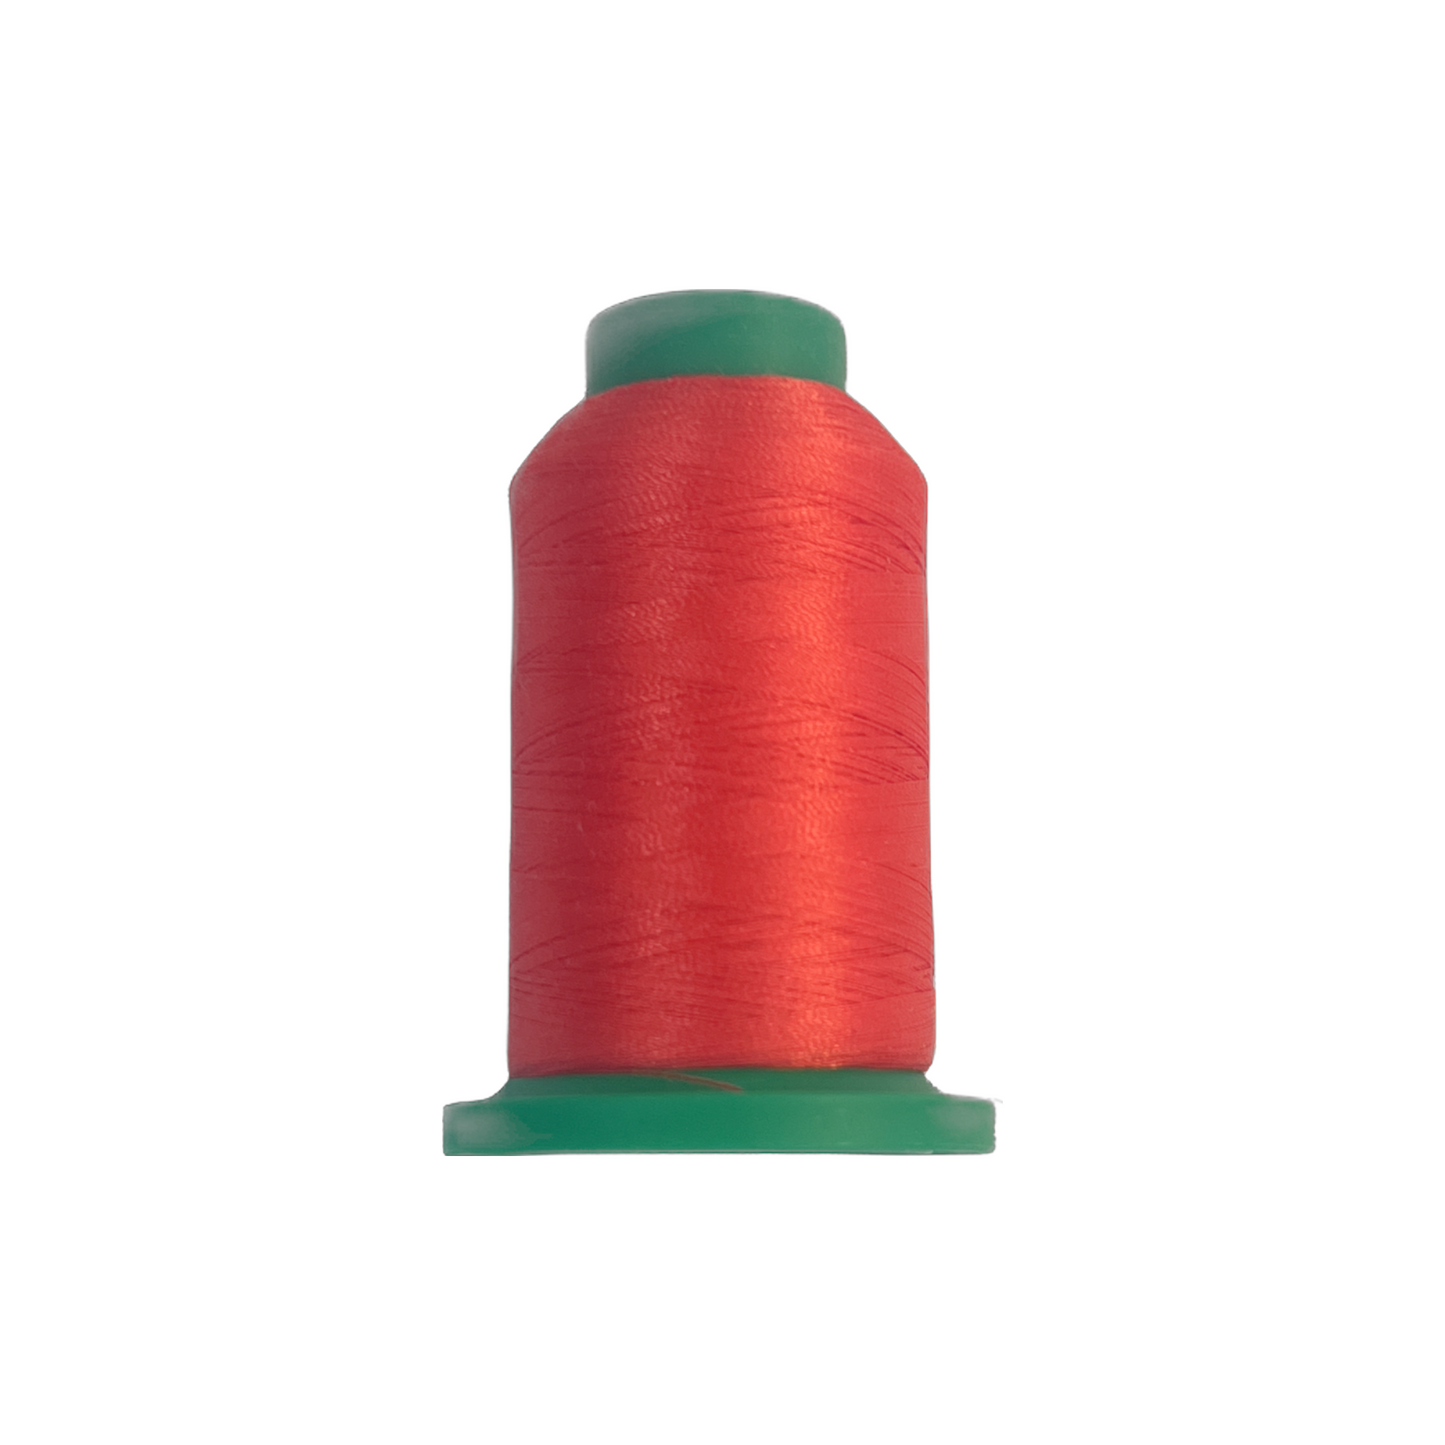 Isacord Thread Red Berry 1701 1000m